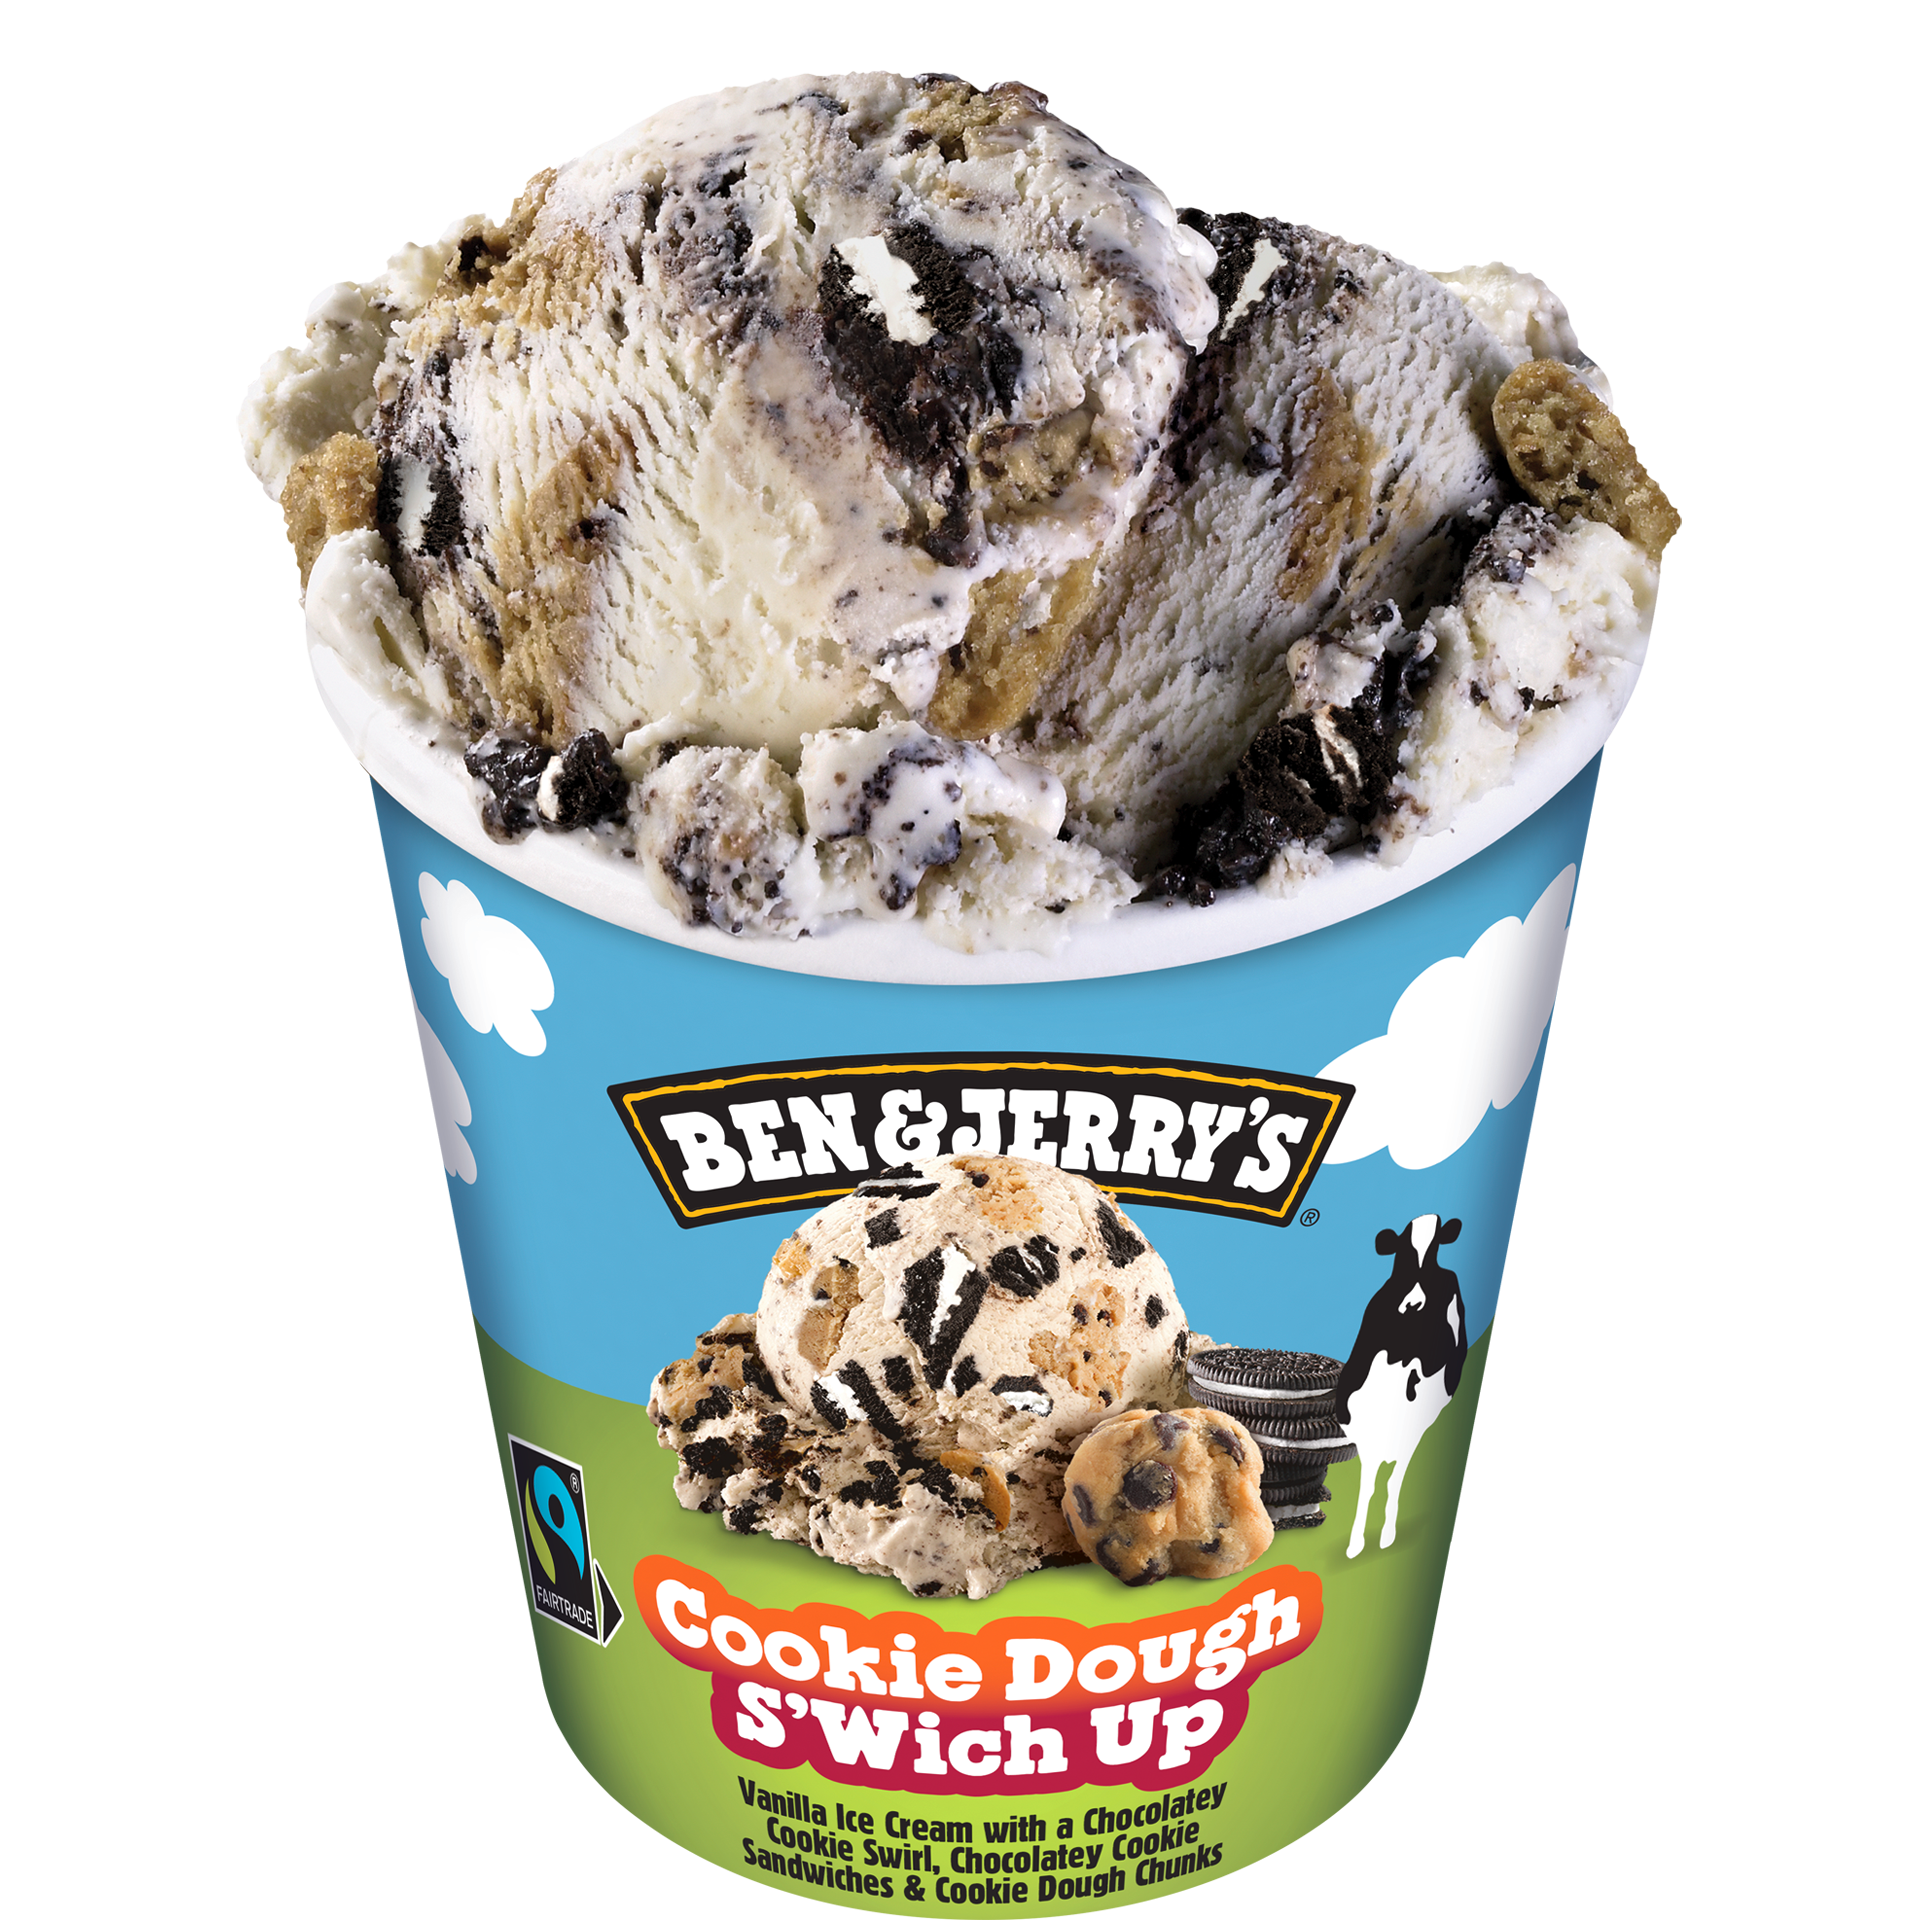 Cookie Dough S'wich Up Original Ice Cream Tubs